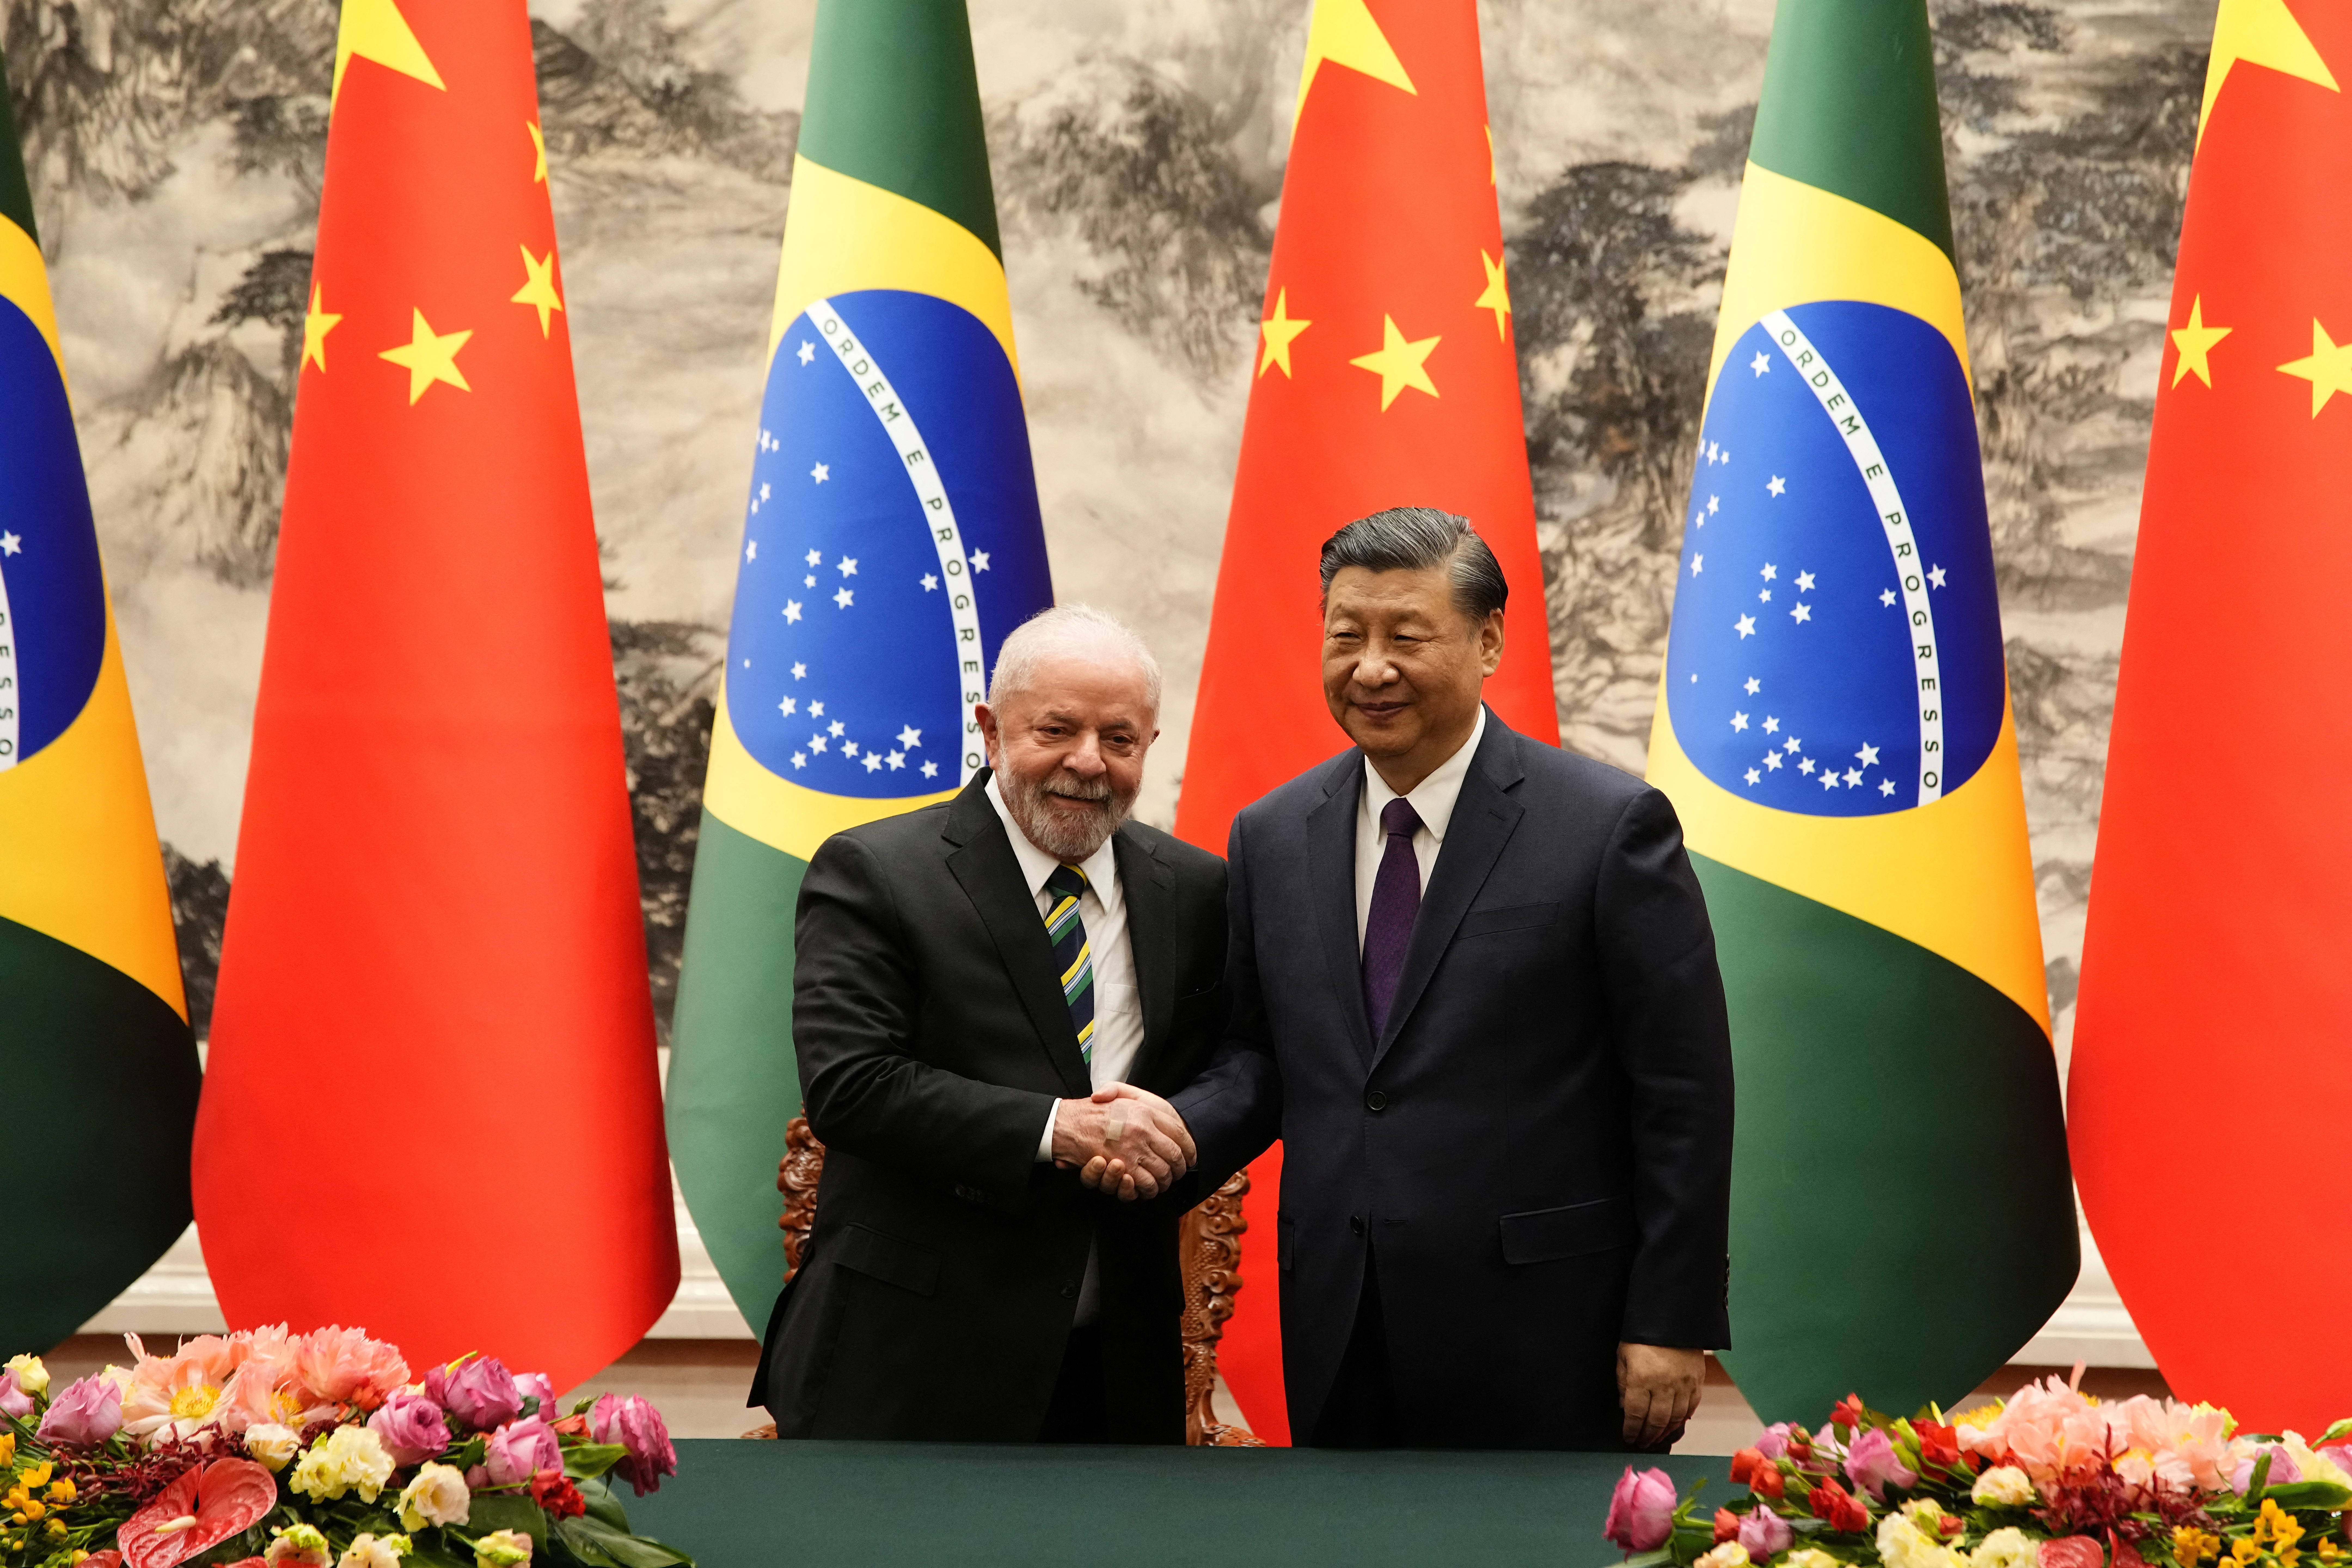 CEBRI-Journal  Hedging Between the U.S. and China: Brazil